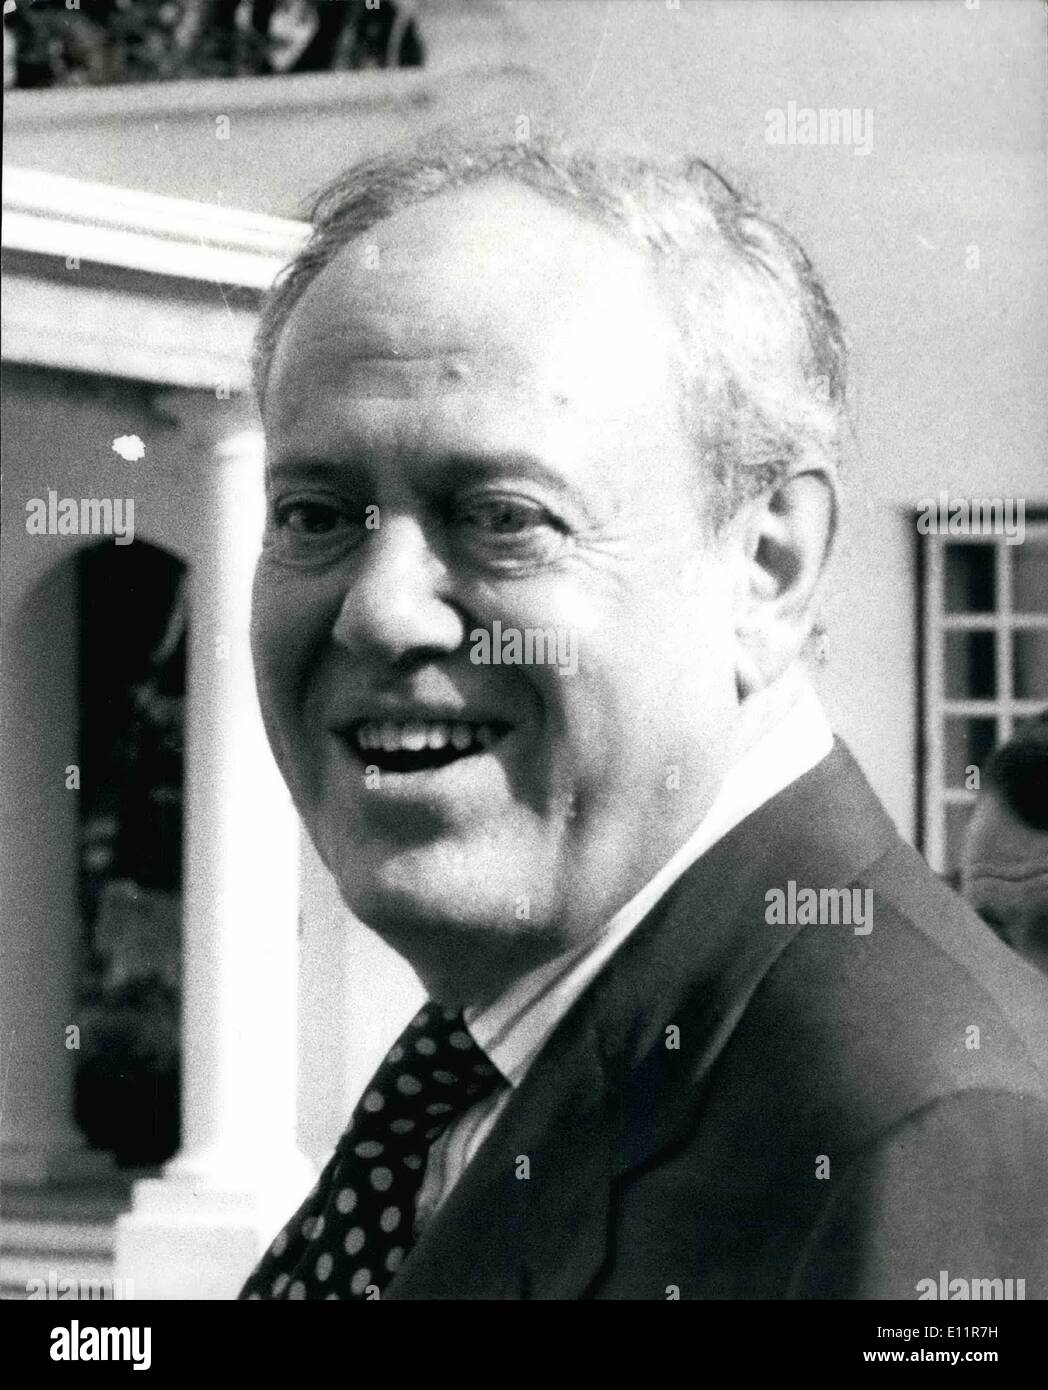 Dec. 12, 1979 - Lord Soames takes over in Rhodesia: Lord Soames the new Governor of Rhodesia, until after the elections hast taken up residence in the Government House in Salisbury, where the Union Jack is flying again after 14 years. Photo shows Lord Soames in the grounds of government House in Salisbury when he met members of the press. Stock Photo